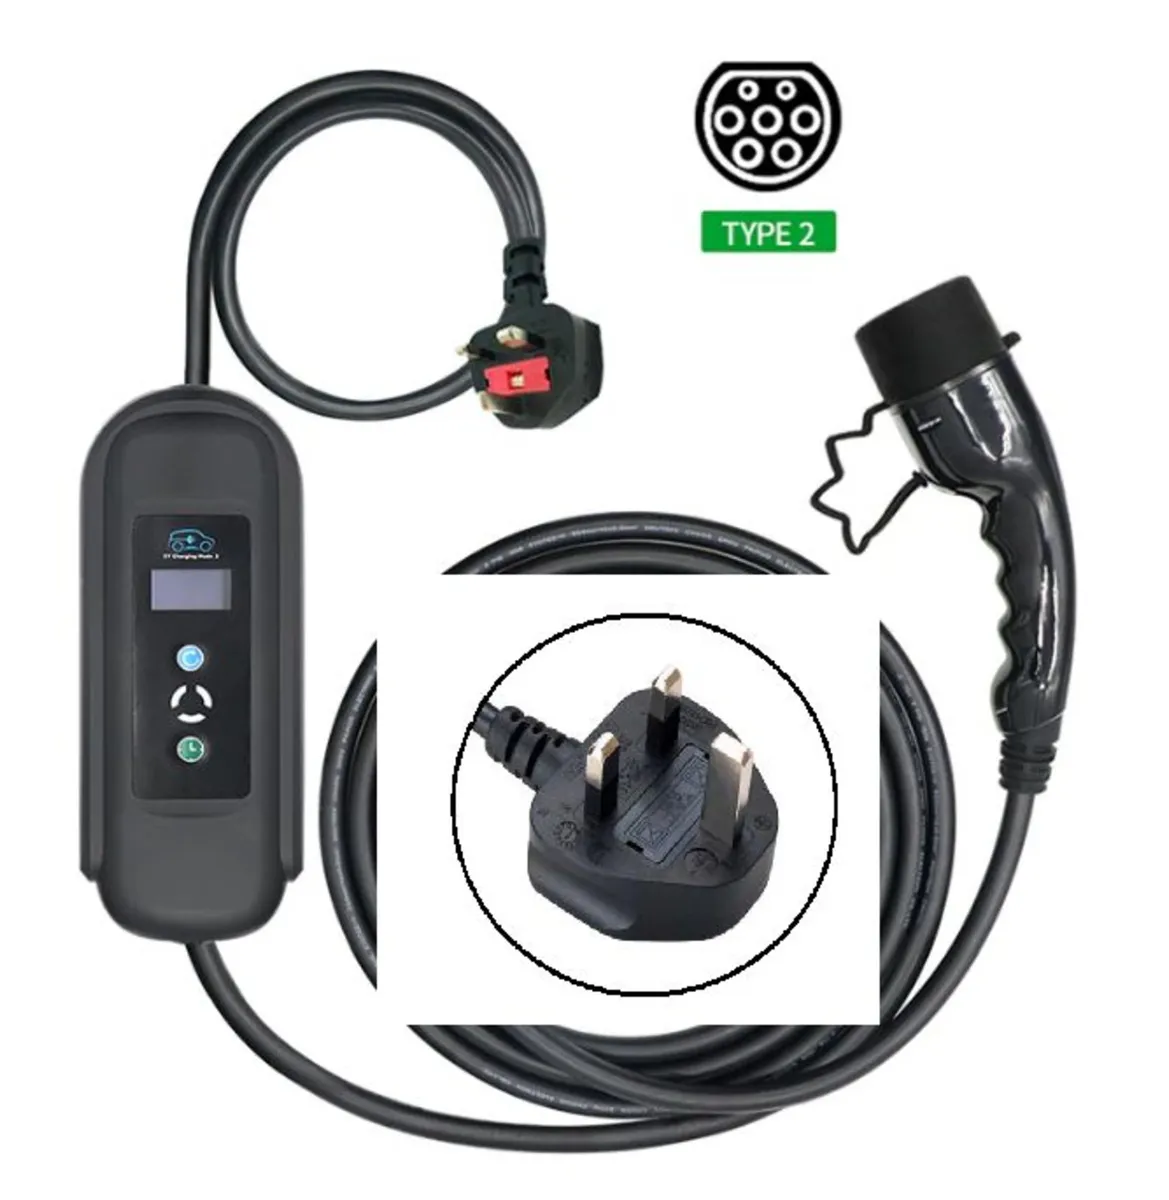 Electric Vehicle Charger, Granny Cable, We Deliver, Type 2